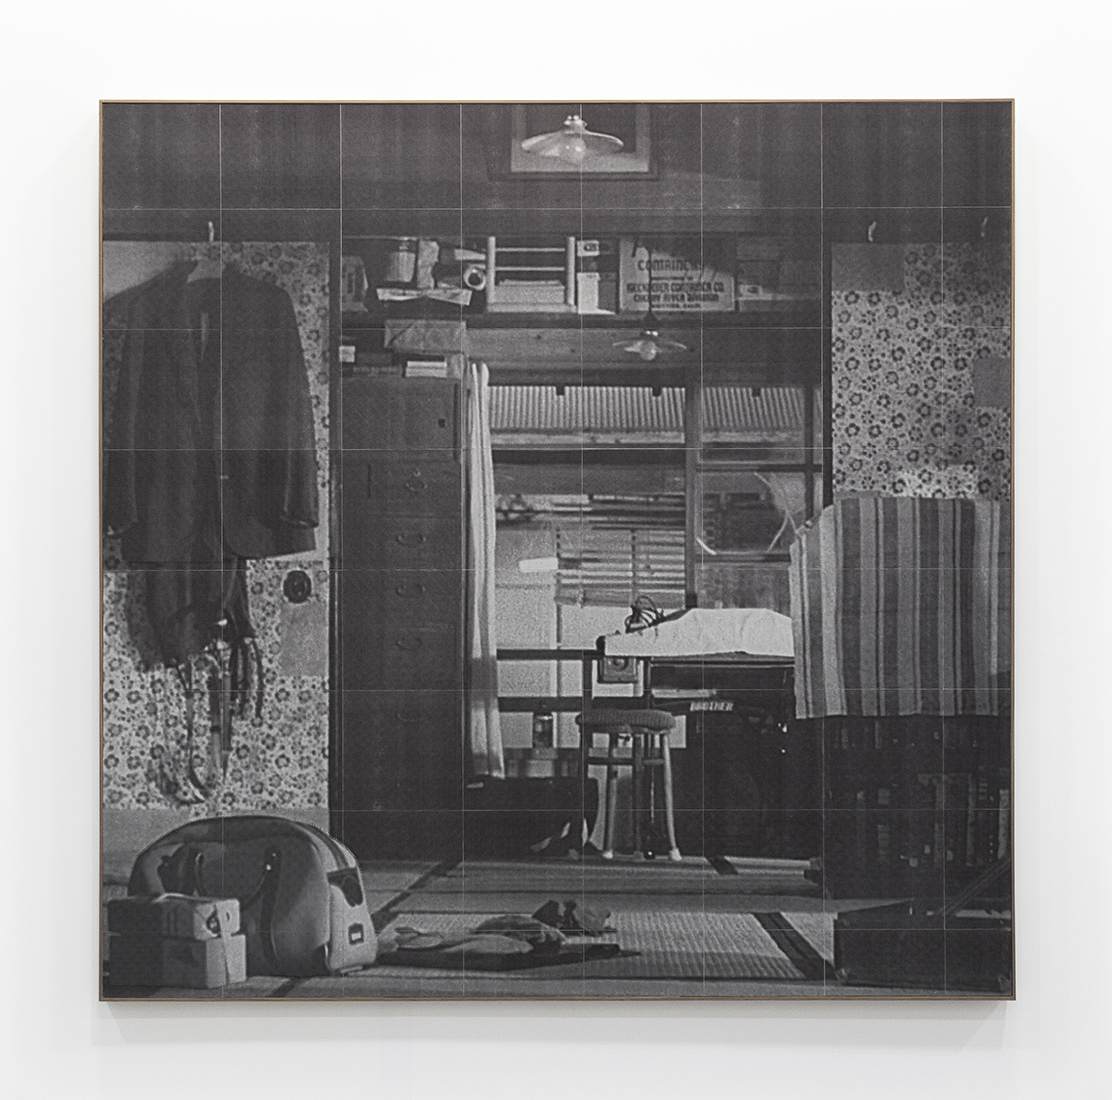    If I had known things would come to this , 2015.   Inkjet and fax prints collage.  136.5 x 135 cm. 